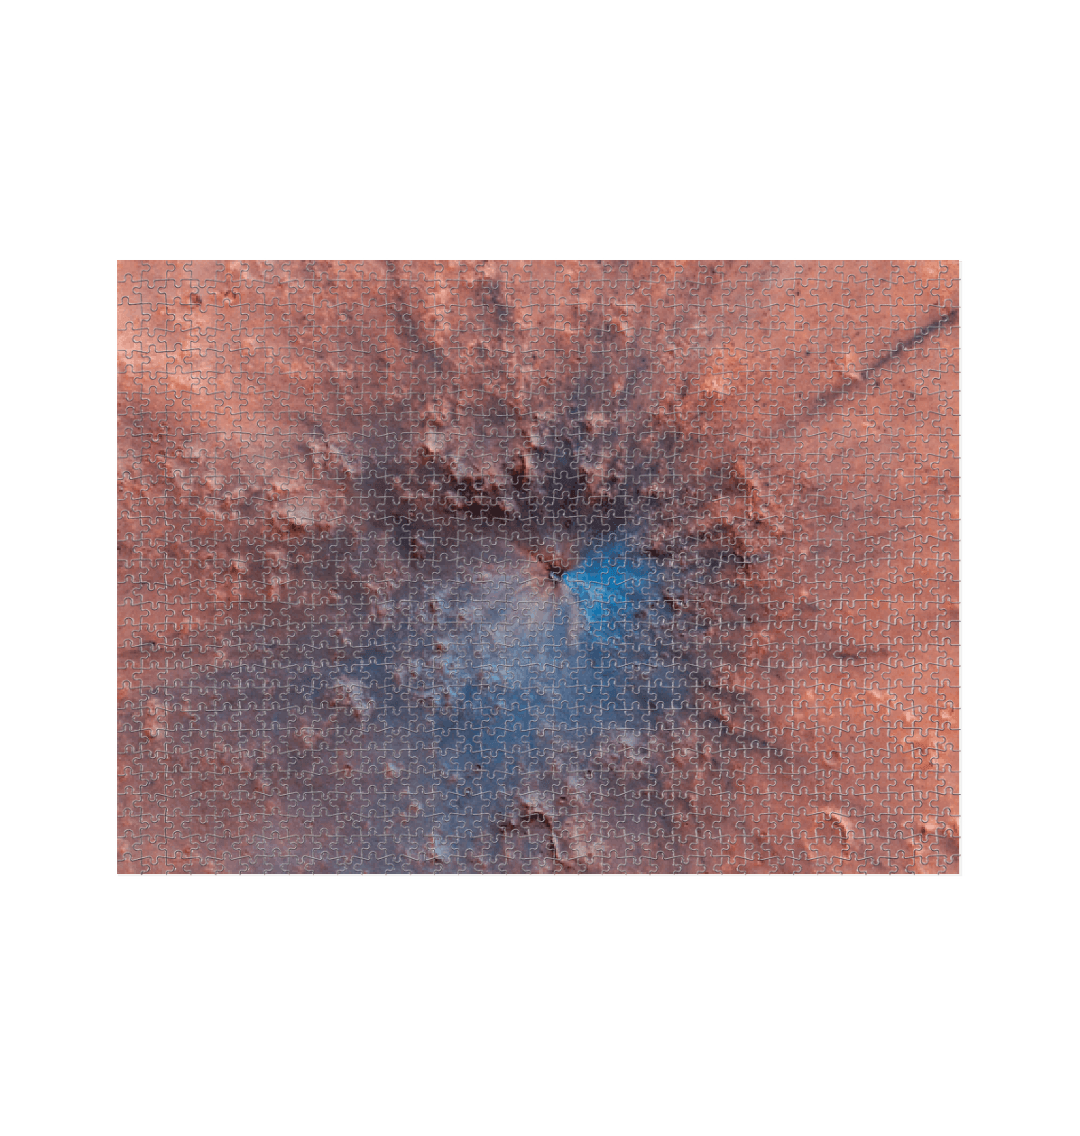 White Mars Impact Crater Jigsaw Puzzle (1000 Piece)